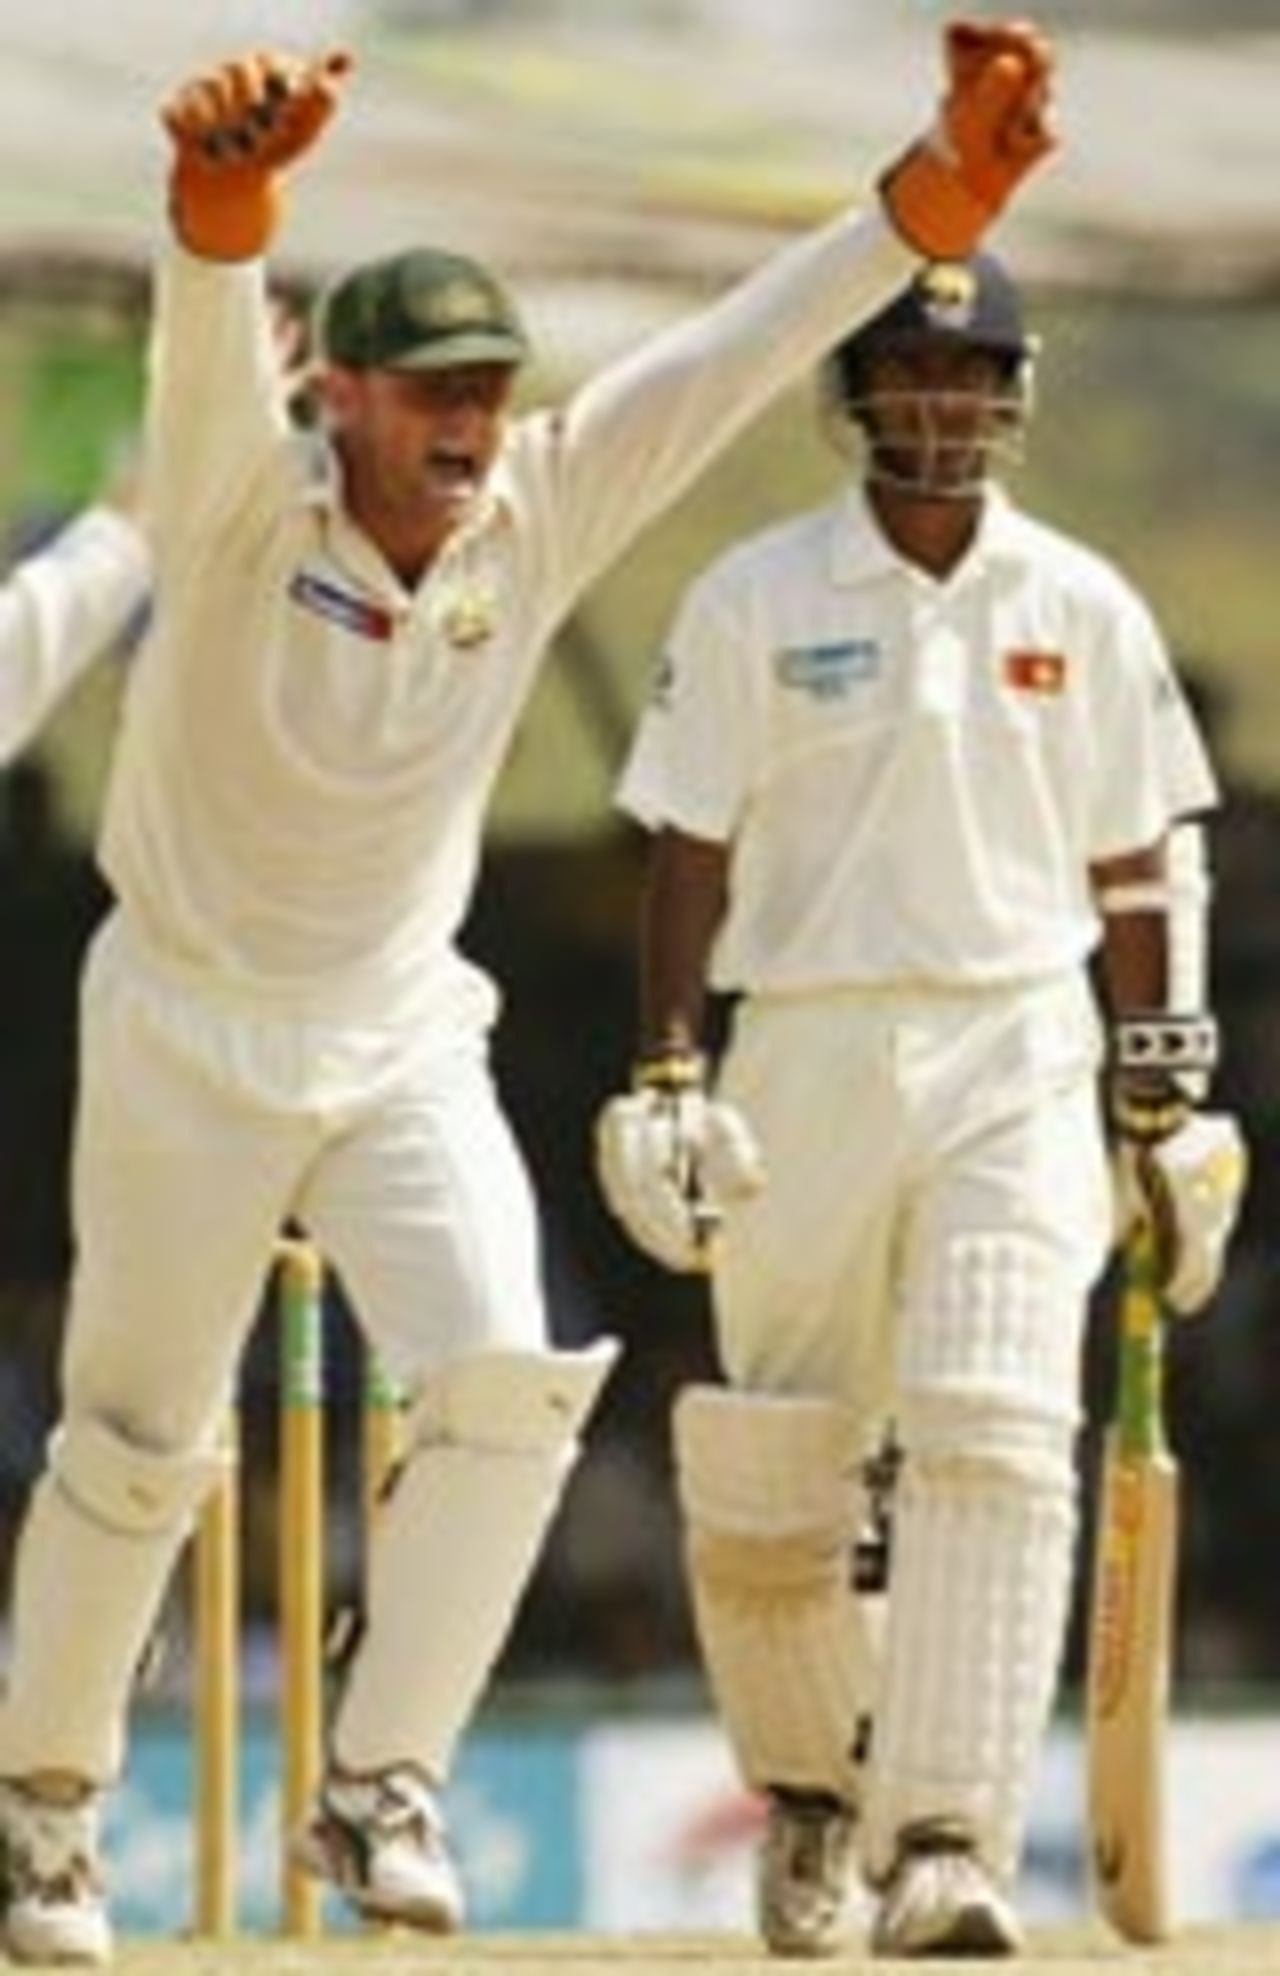 Adam Gilchrist celebrates as Kaushal Lokuarachchi in trapped in front, Sri Lanka v Australia, 2nd Test, Kandy, 5th day, March 20, 2004